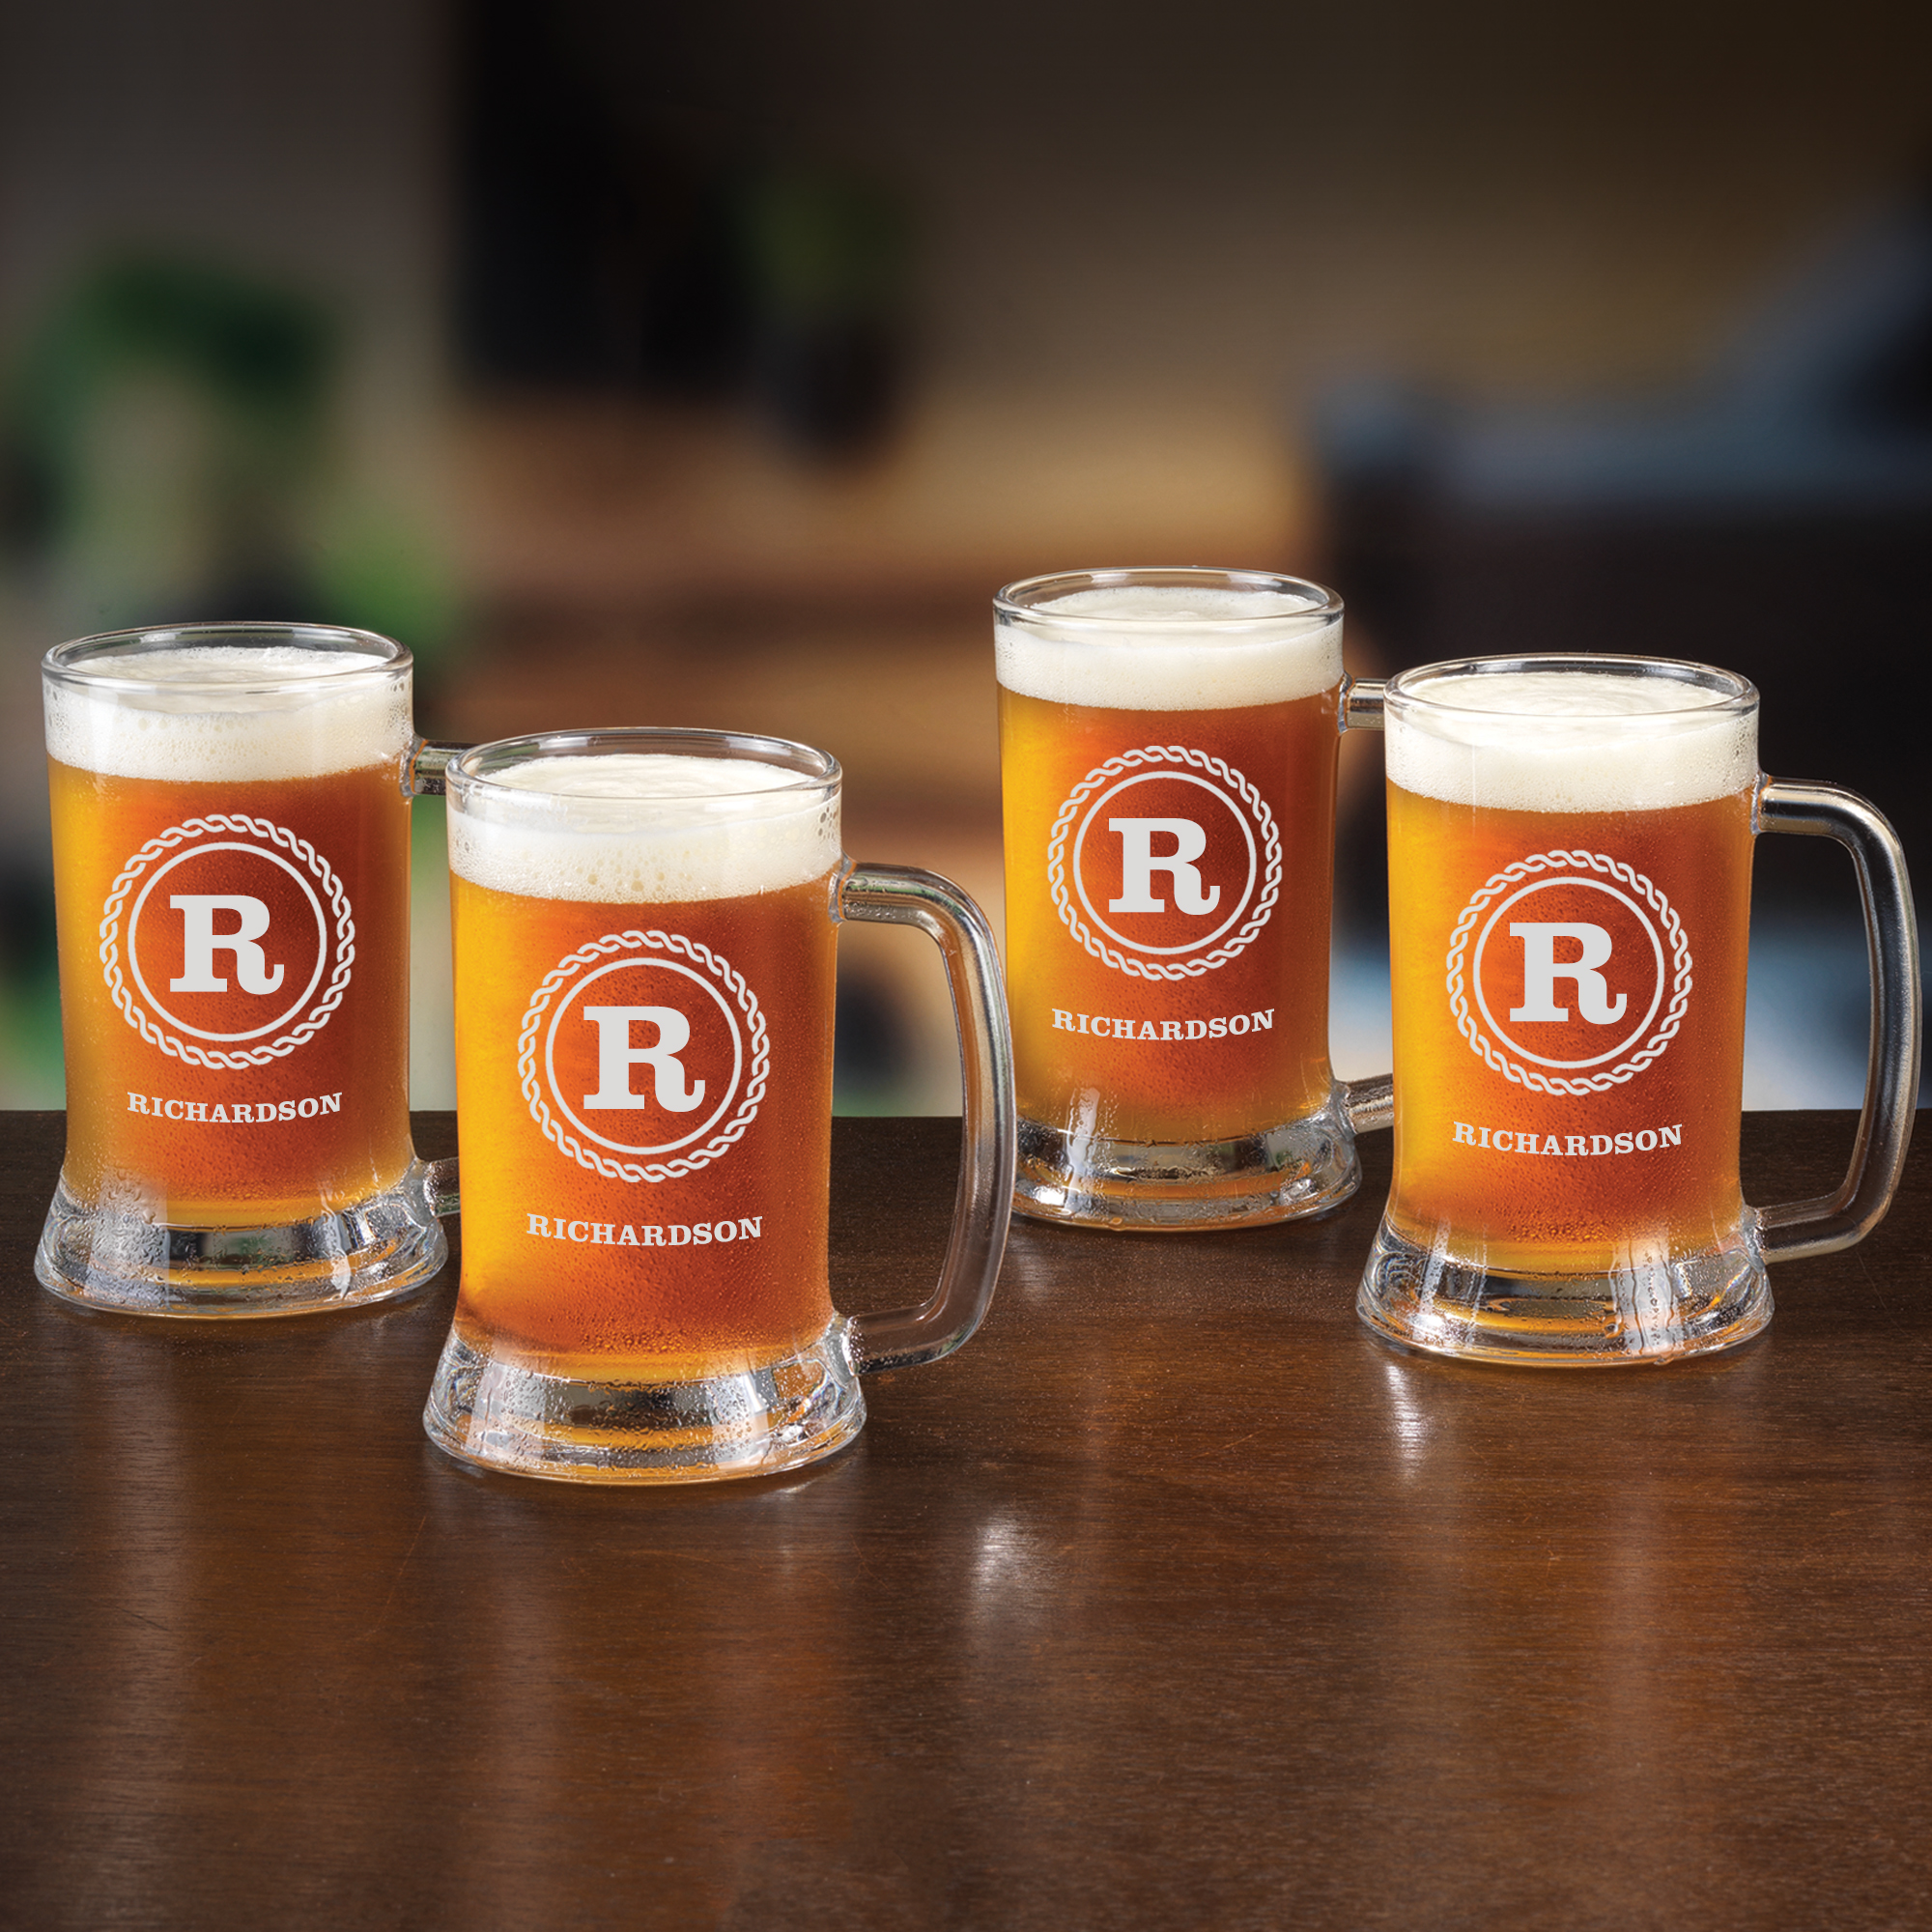 The Personalized Beer Mug Set 10532 0022 a main